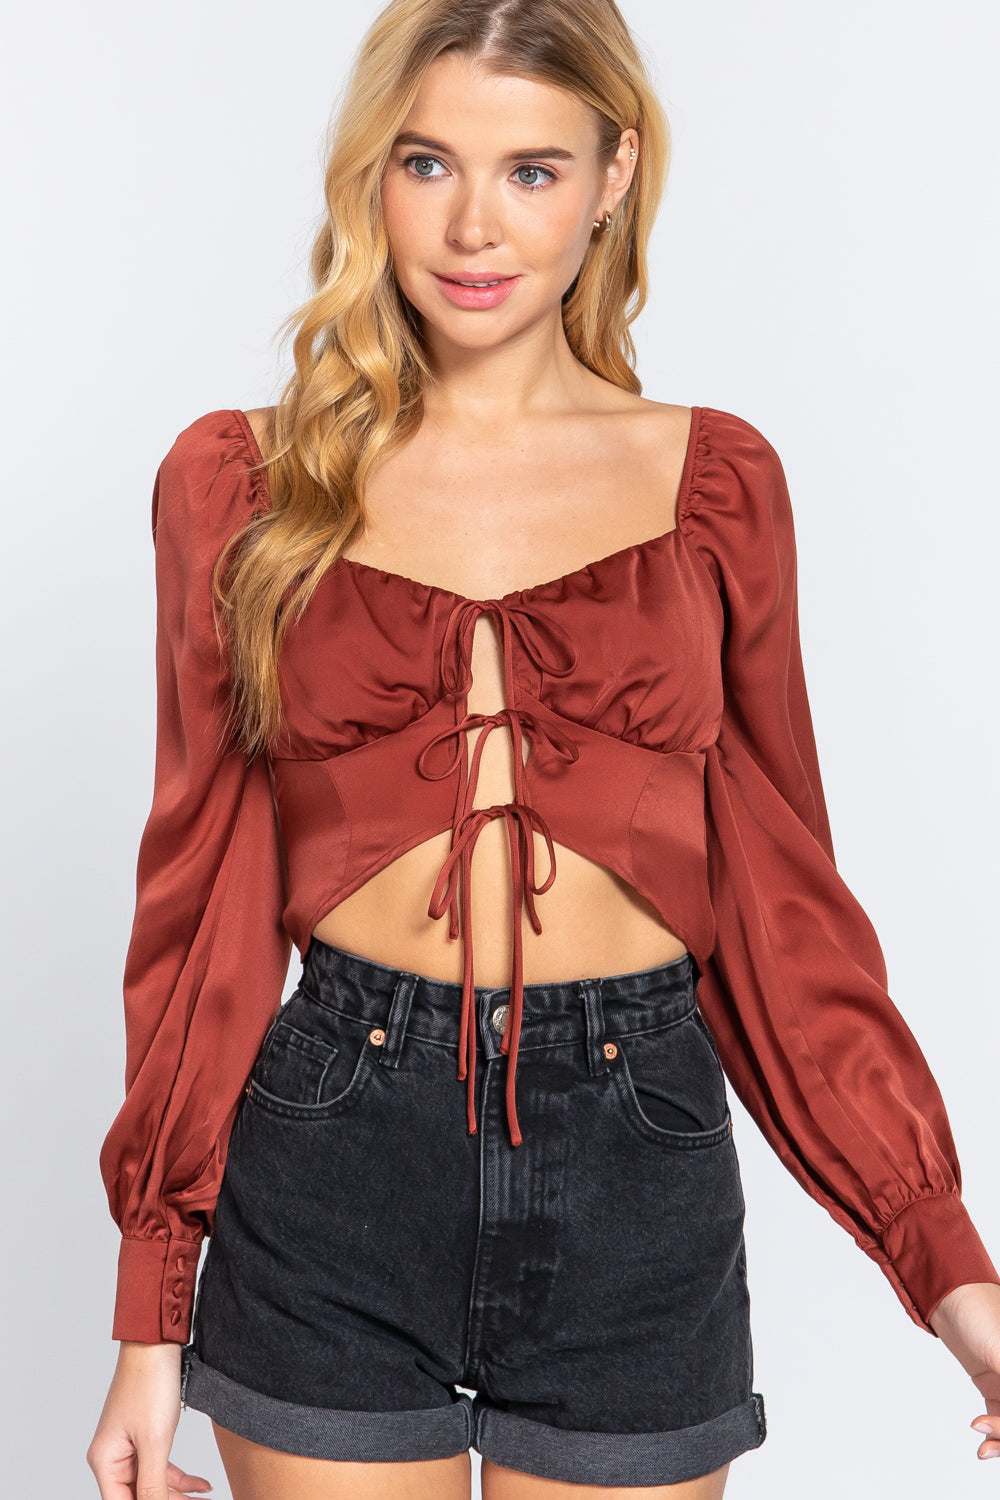 Active Basic Tie Front Cropped Blouses Shirts & Tops RYSE Clothing Co. Rust S 